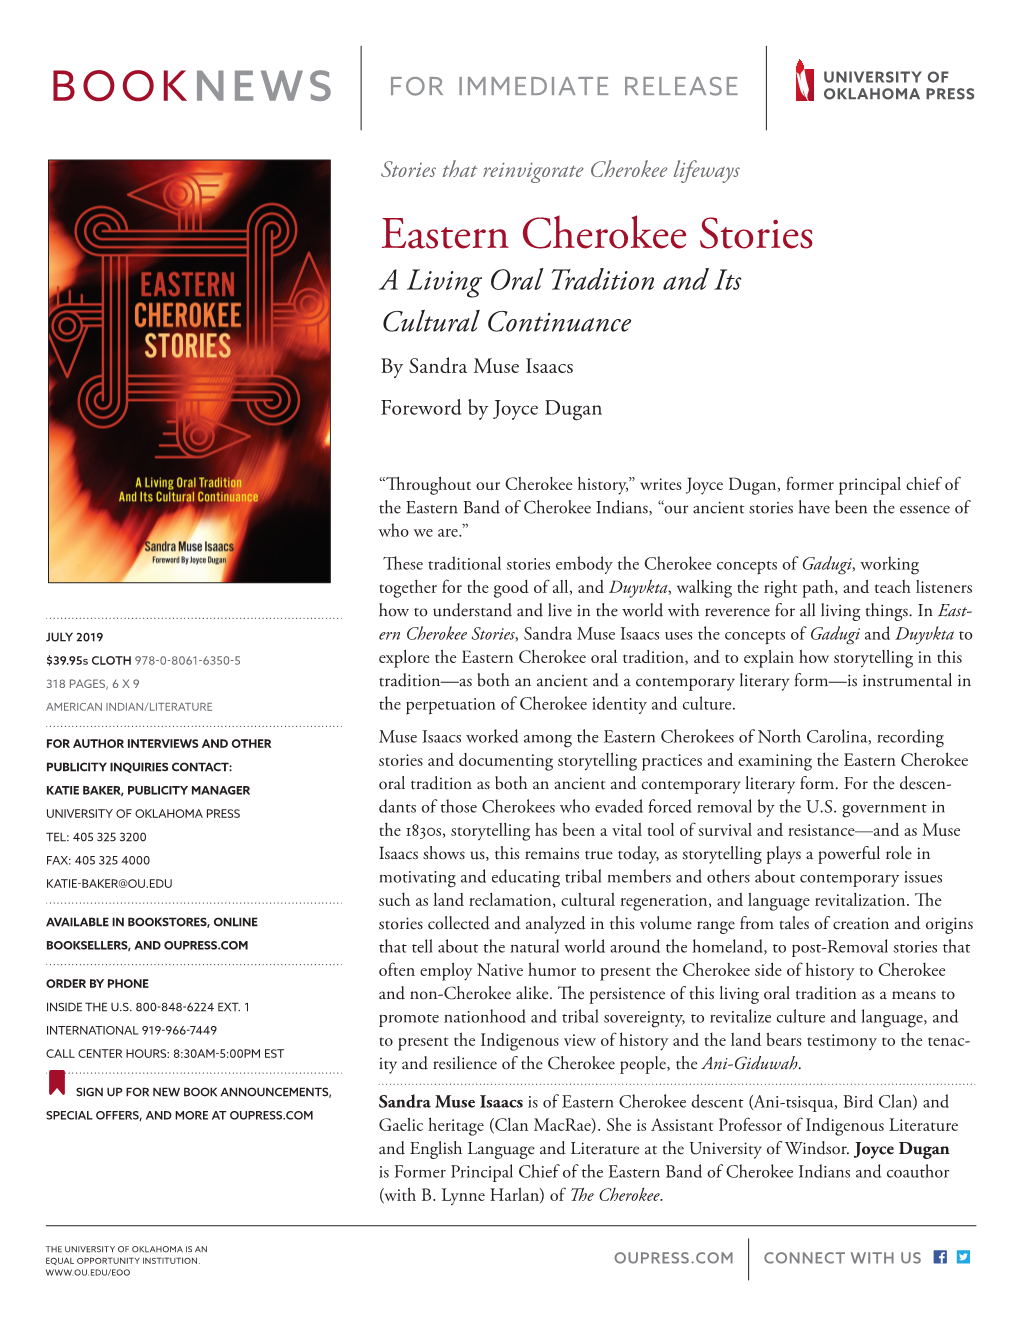 Eastern Cherokee Stories a Living Oral Tradition and Its Cultural Continuance